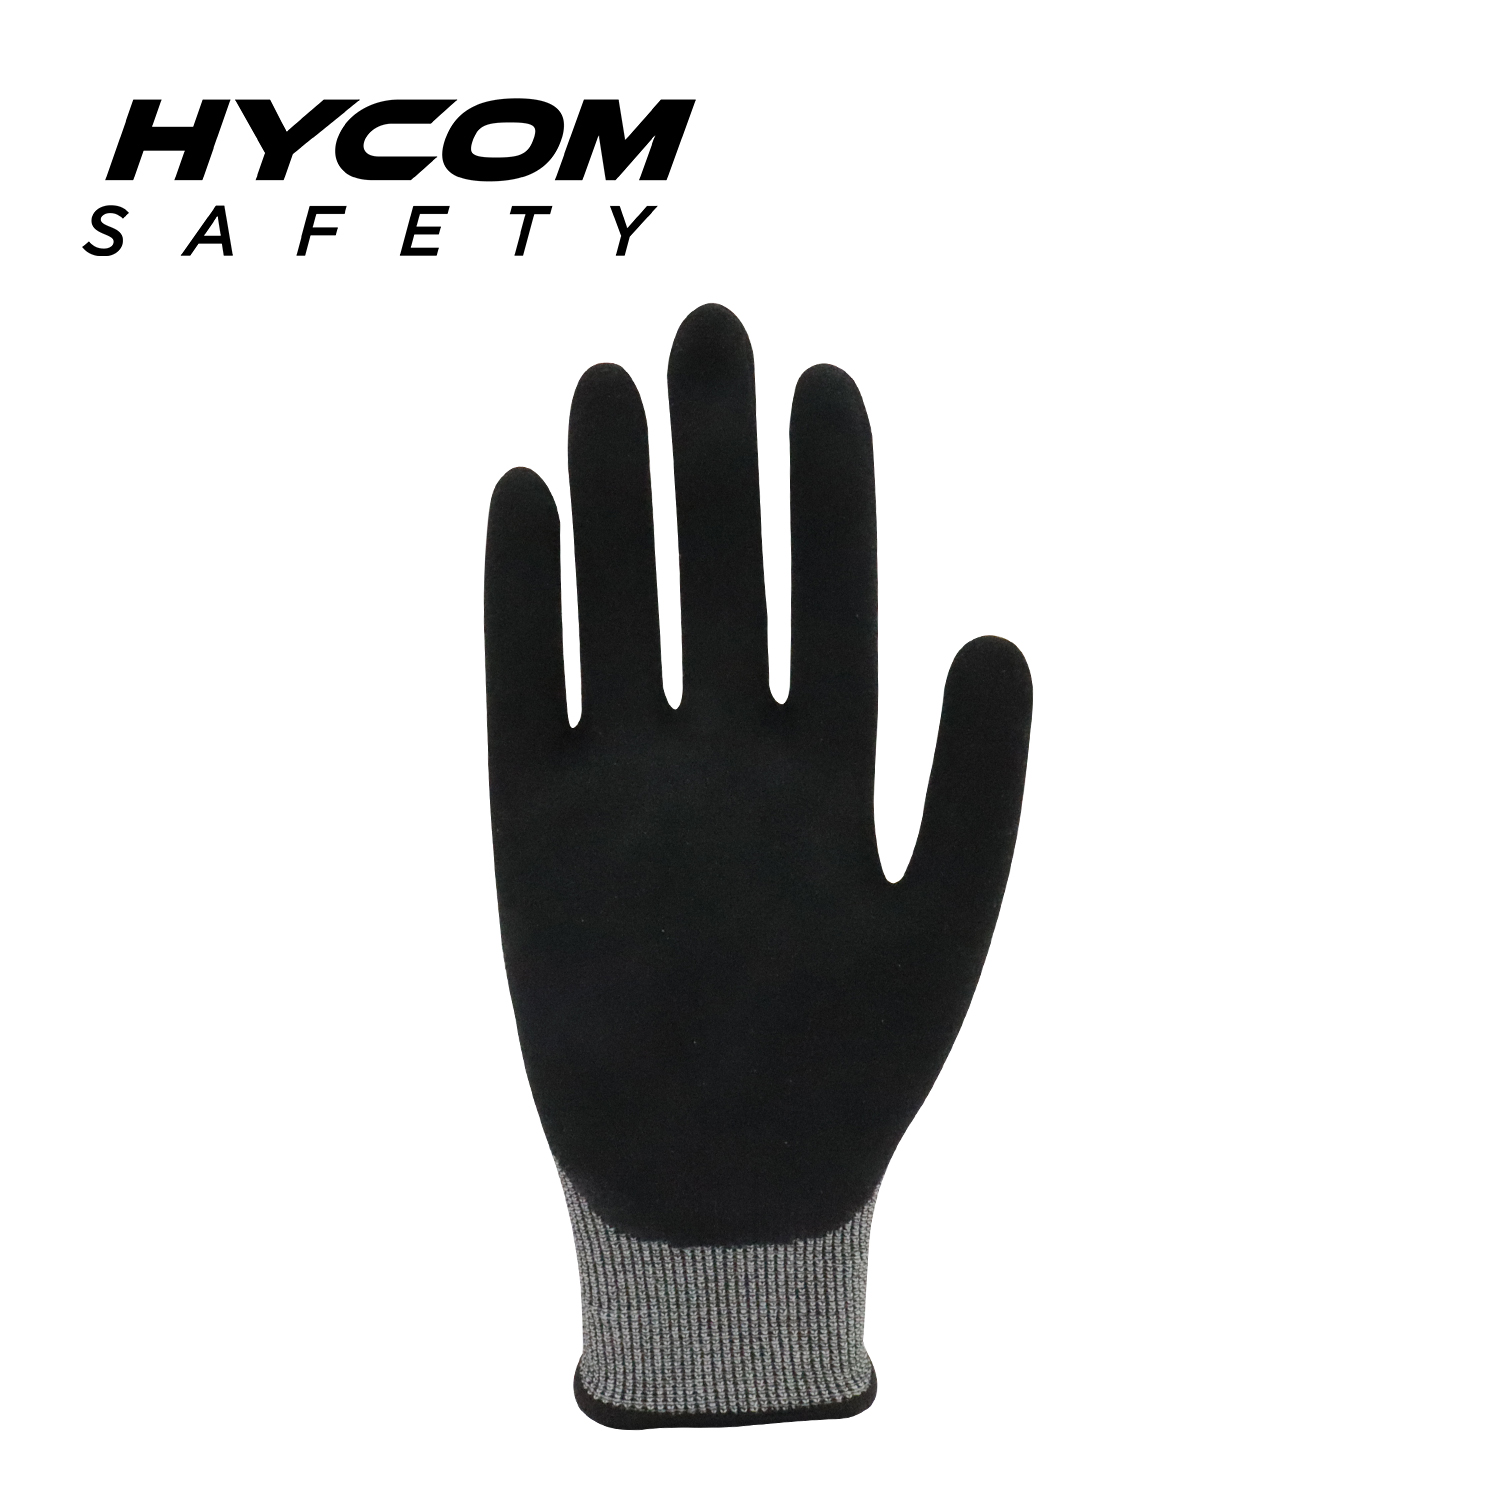 HYCOM 18G ANSI 9 Cut Resistant Glove with Palm HT Sandy Nitrile Coating Super Thinner PPE Gloves